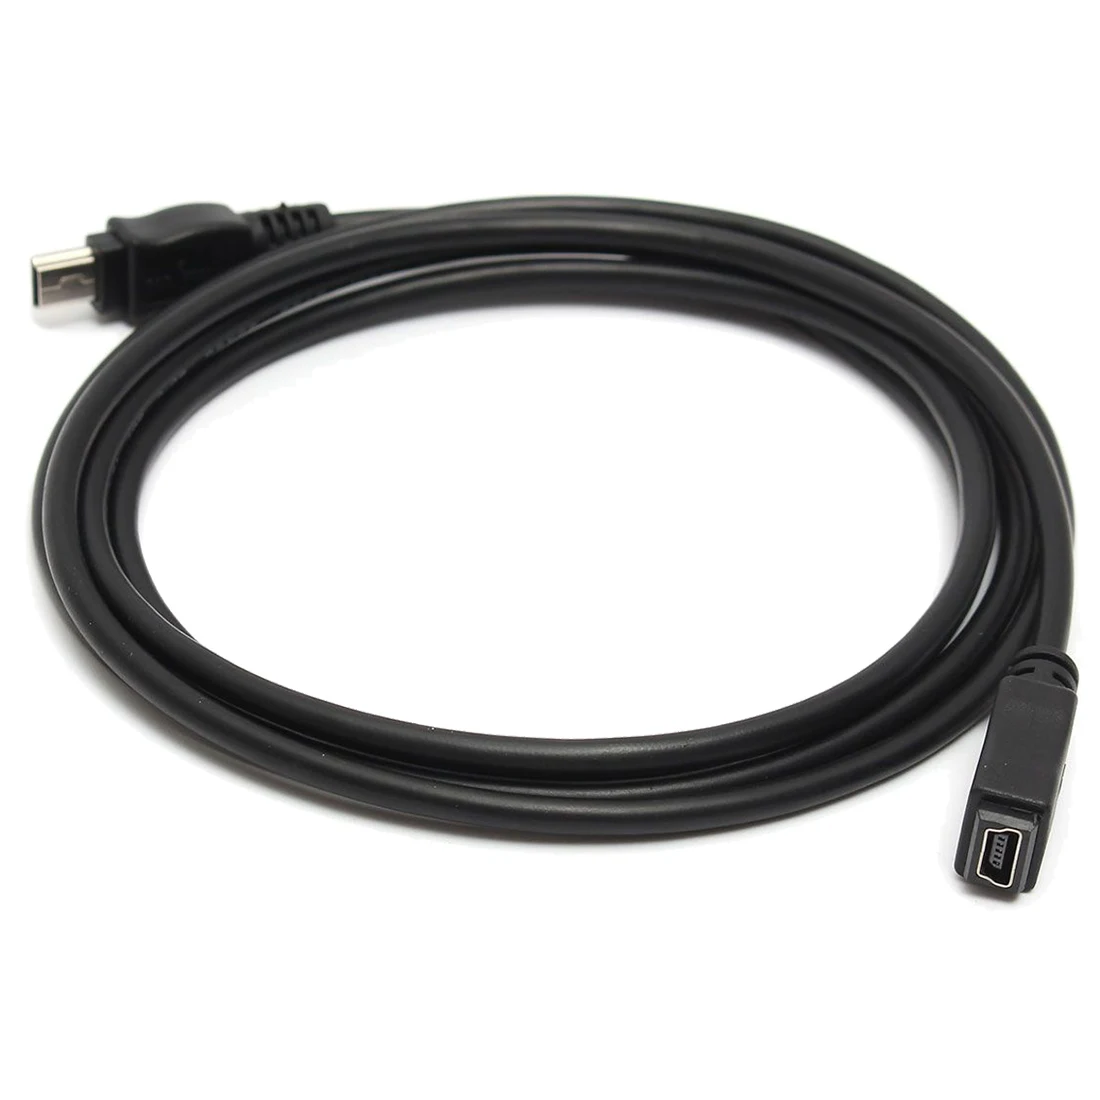 1.5m Mini USB B 5pin Male To Female Extension Cable Cord Adapter Black | Data Cables